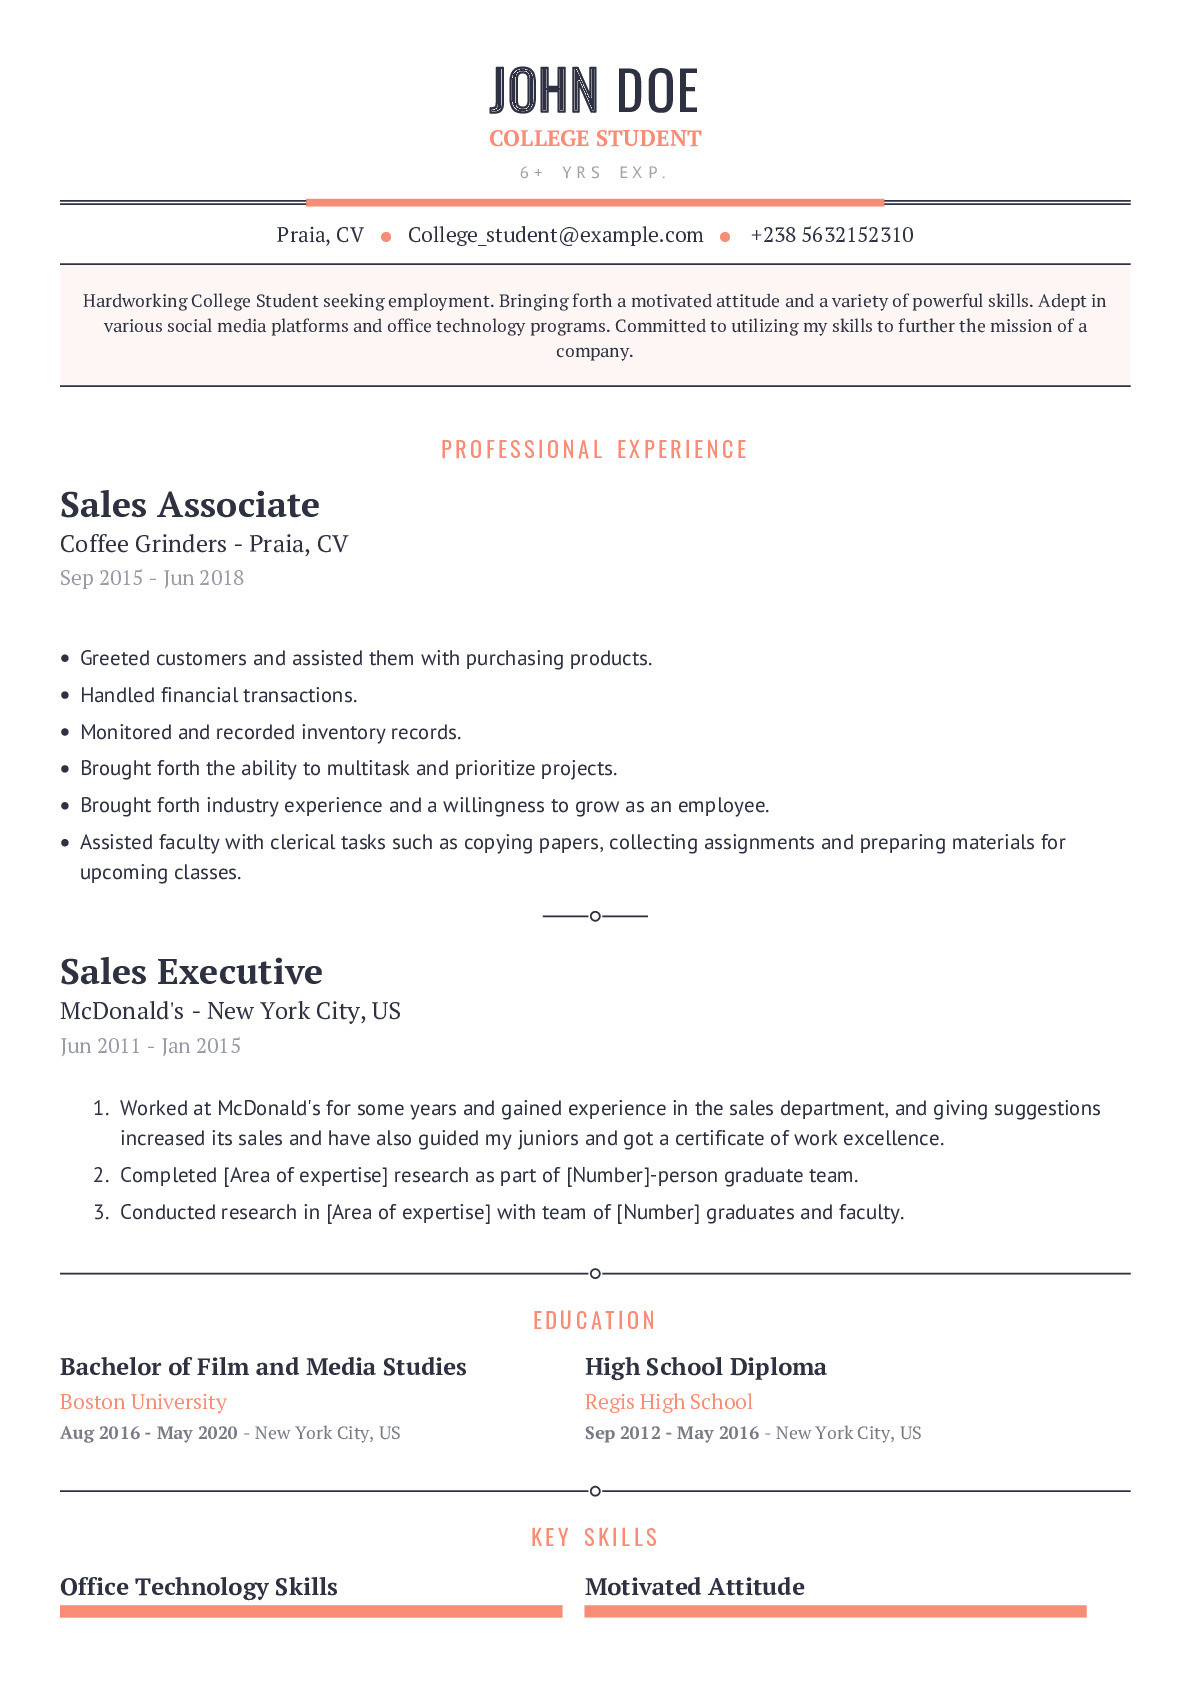 Sample Studemt Resumes who Got Into Good Coplege College Student Resume Example with Content Sample Craftmycv